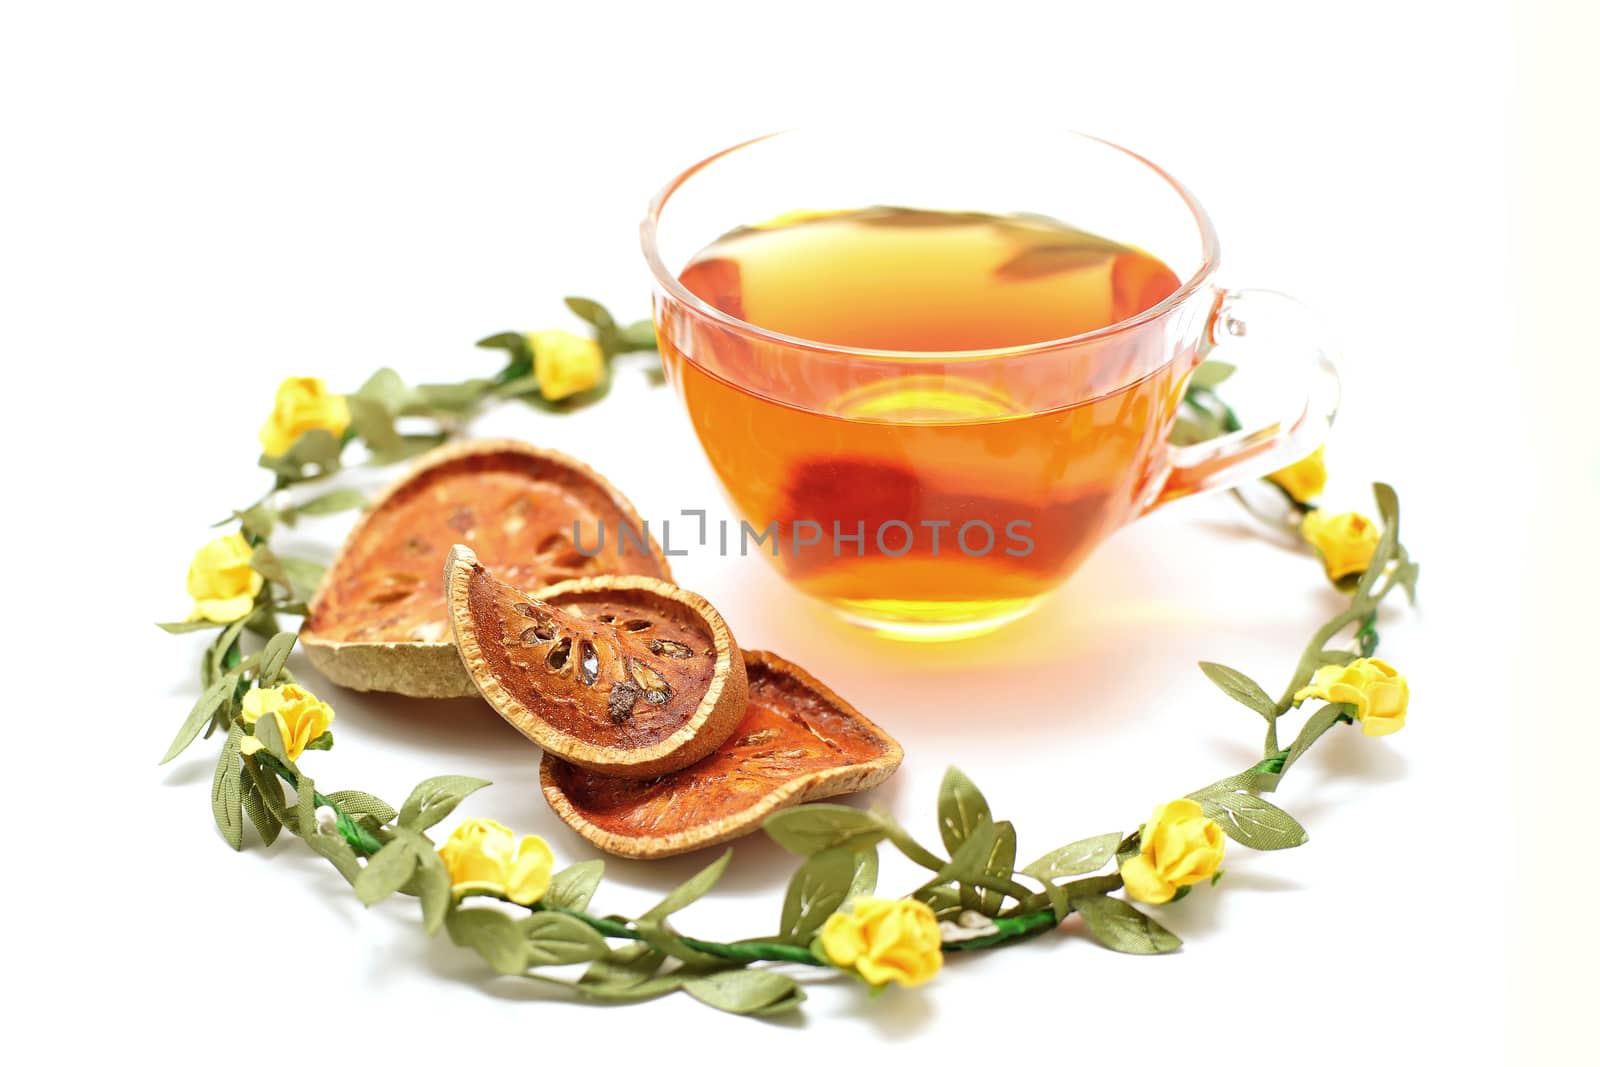 hot bael juice and dried bael fruit isolated on white background